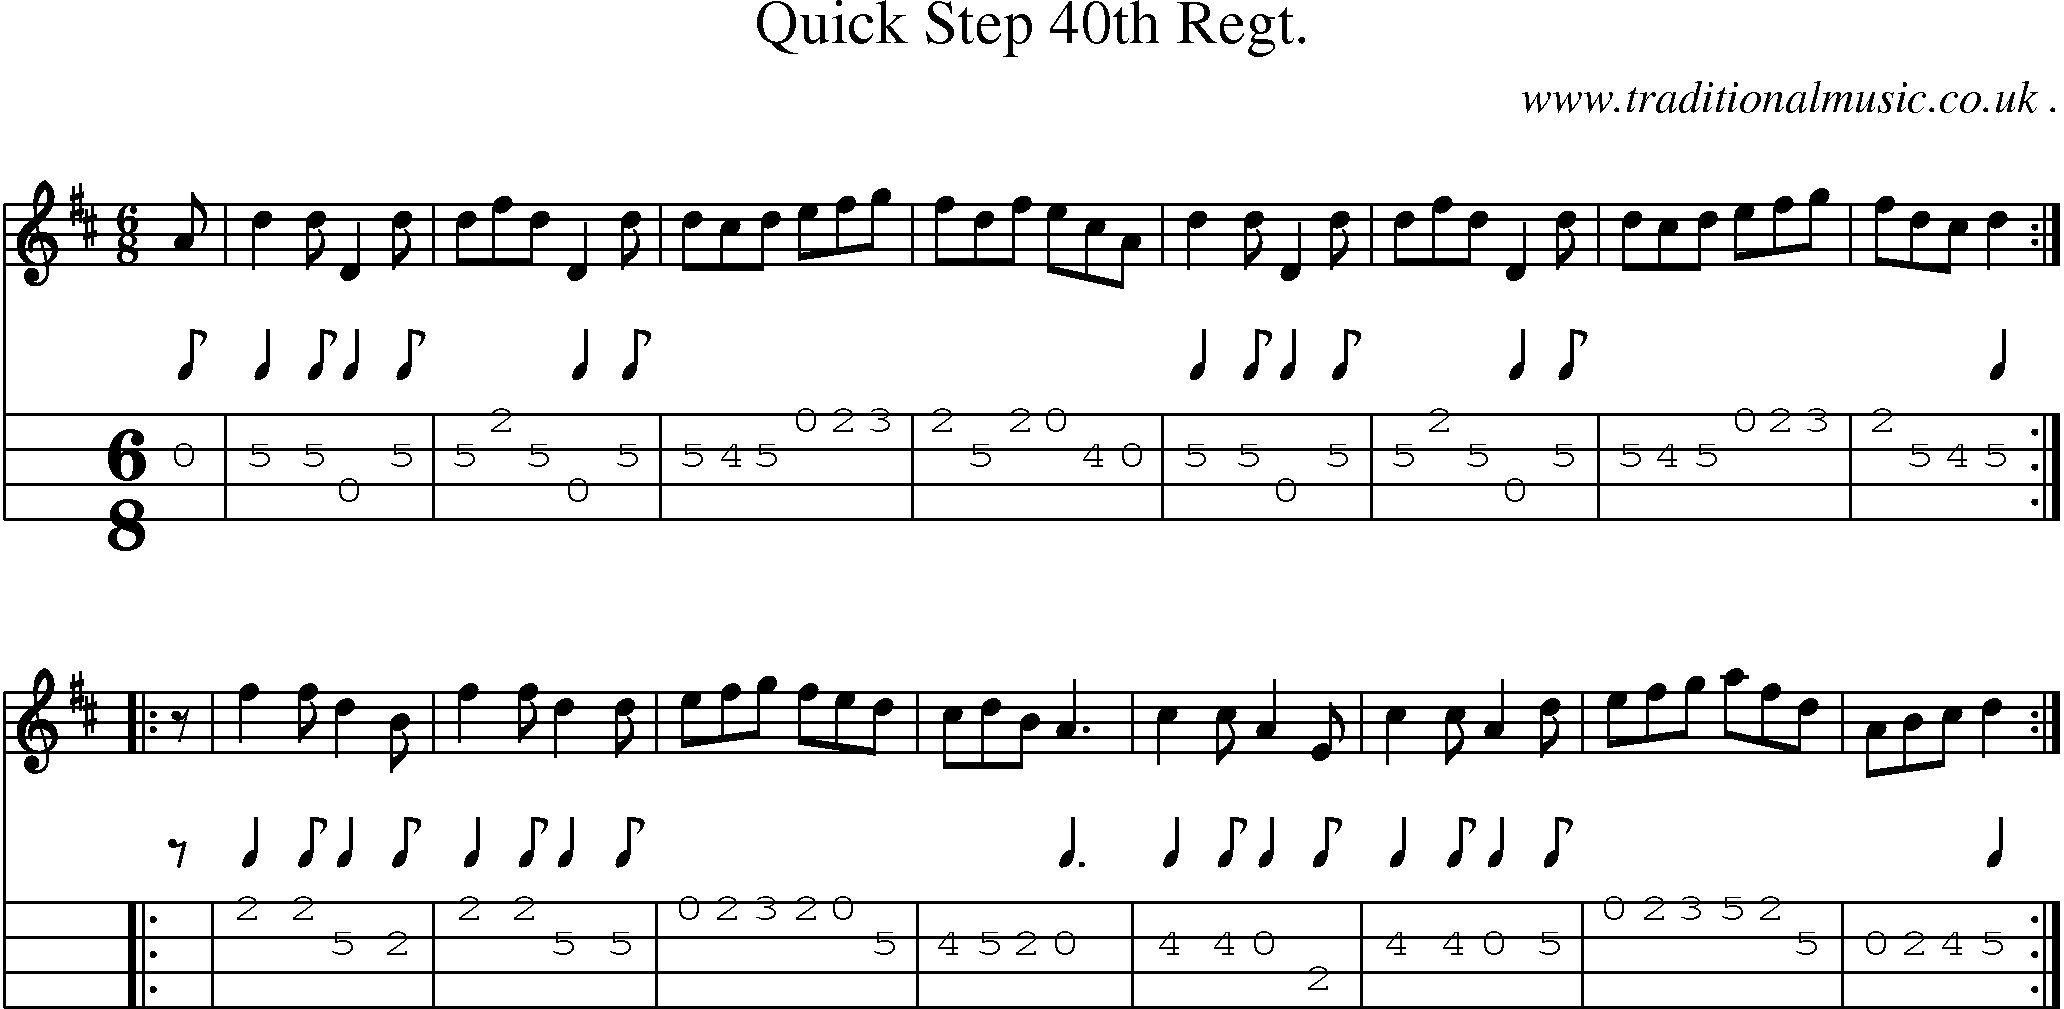 Sheet-music  score, Chords and Mandolin Tabs for Quick Step 40th Regt